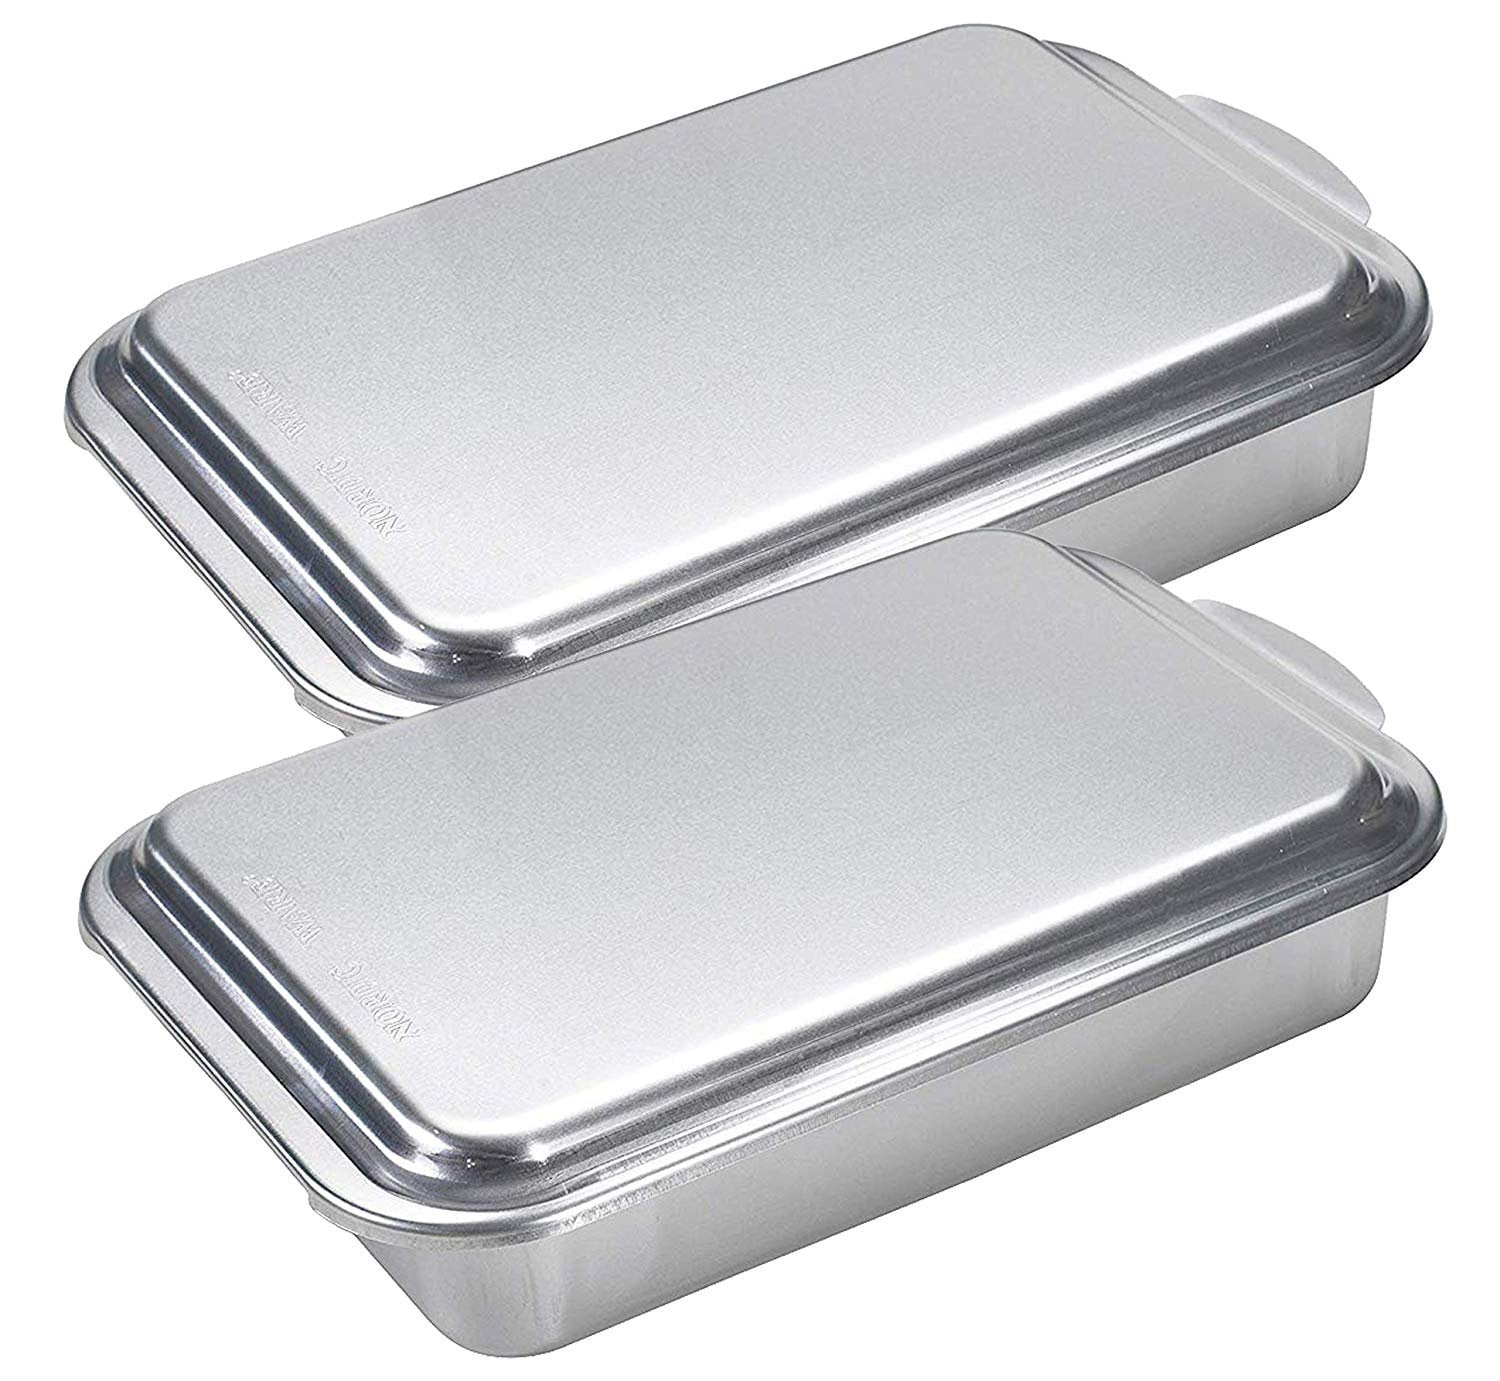 9 x 13 Aluminum Cake Pan with Lid - Sams Engraving & Gifts